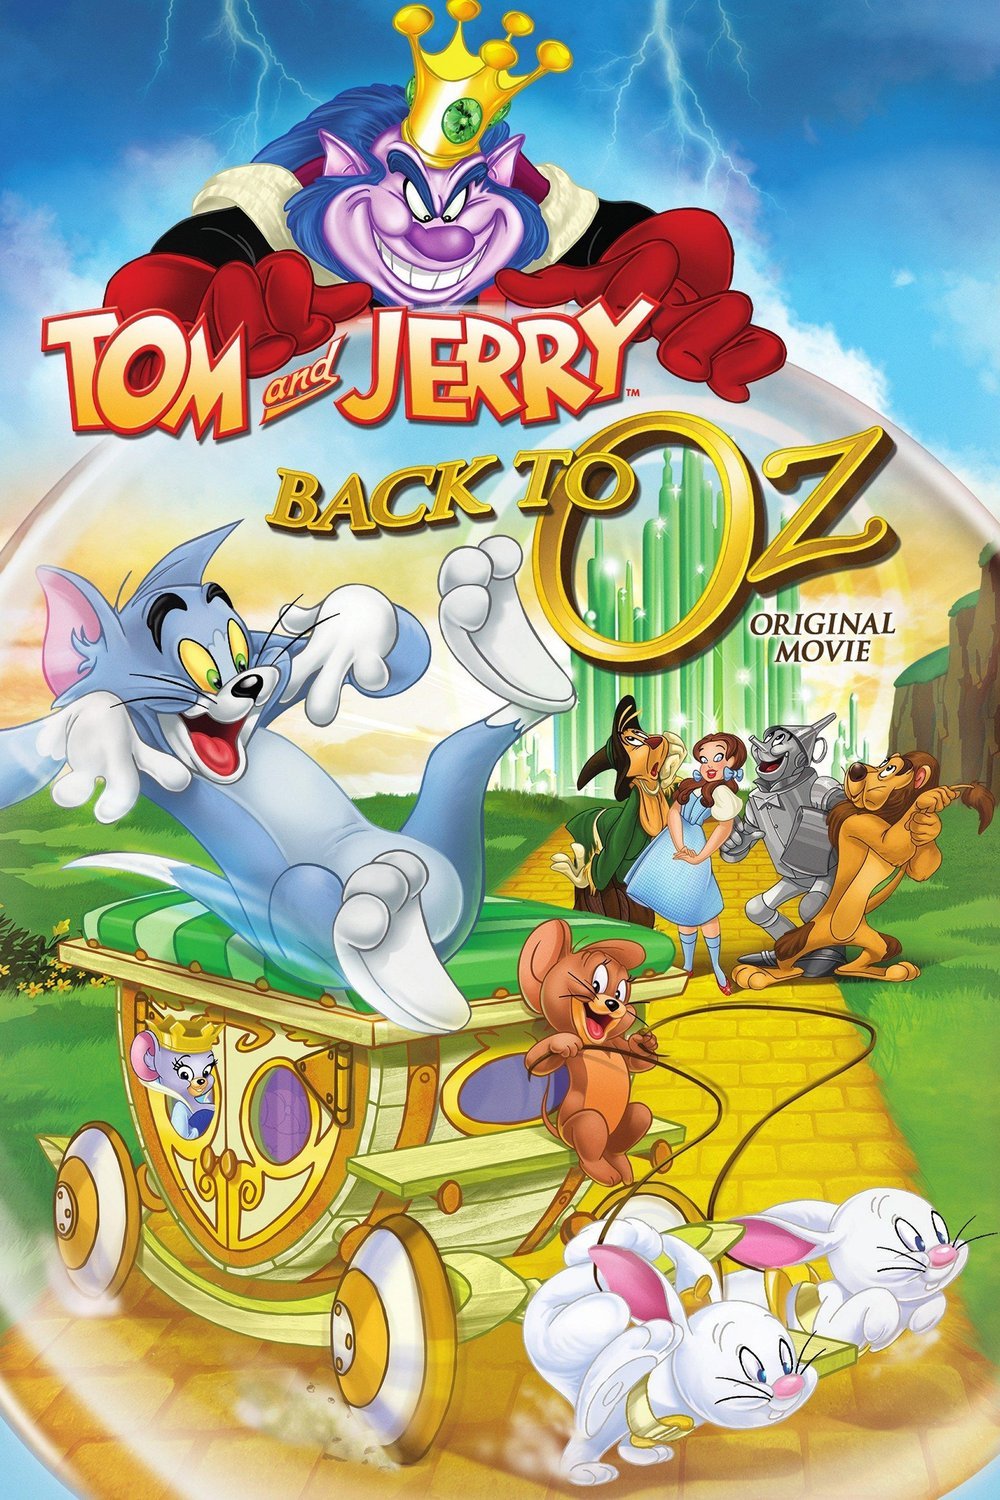 Poster of the movie Tom and Jerry: Back to Oz